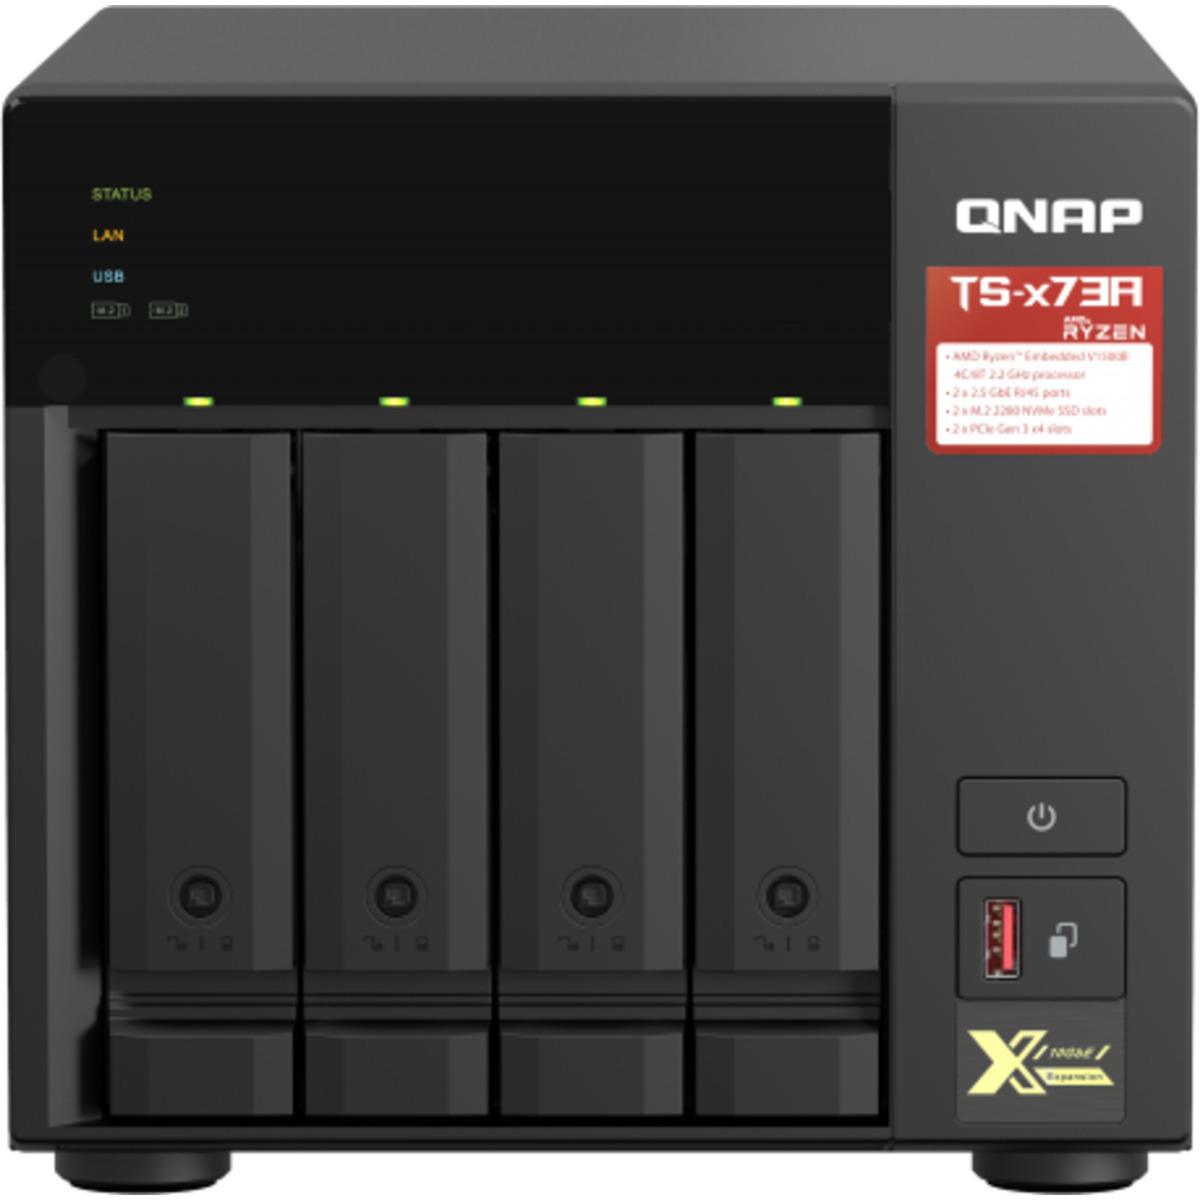 QNAP TS-473A 18tb 4-Bay Desktop Multimedia / Power User / Business NAS - Network Attached Storage Device 3x6tb Western Digital Red Plus WD60EFPX 3.5 5640rpm SATA 6Gb/s HDD NAS Class Drives Installed - Burn-In Tested TS-473A